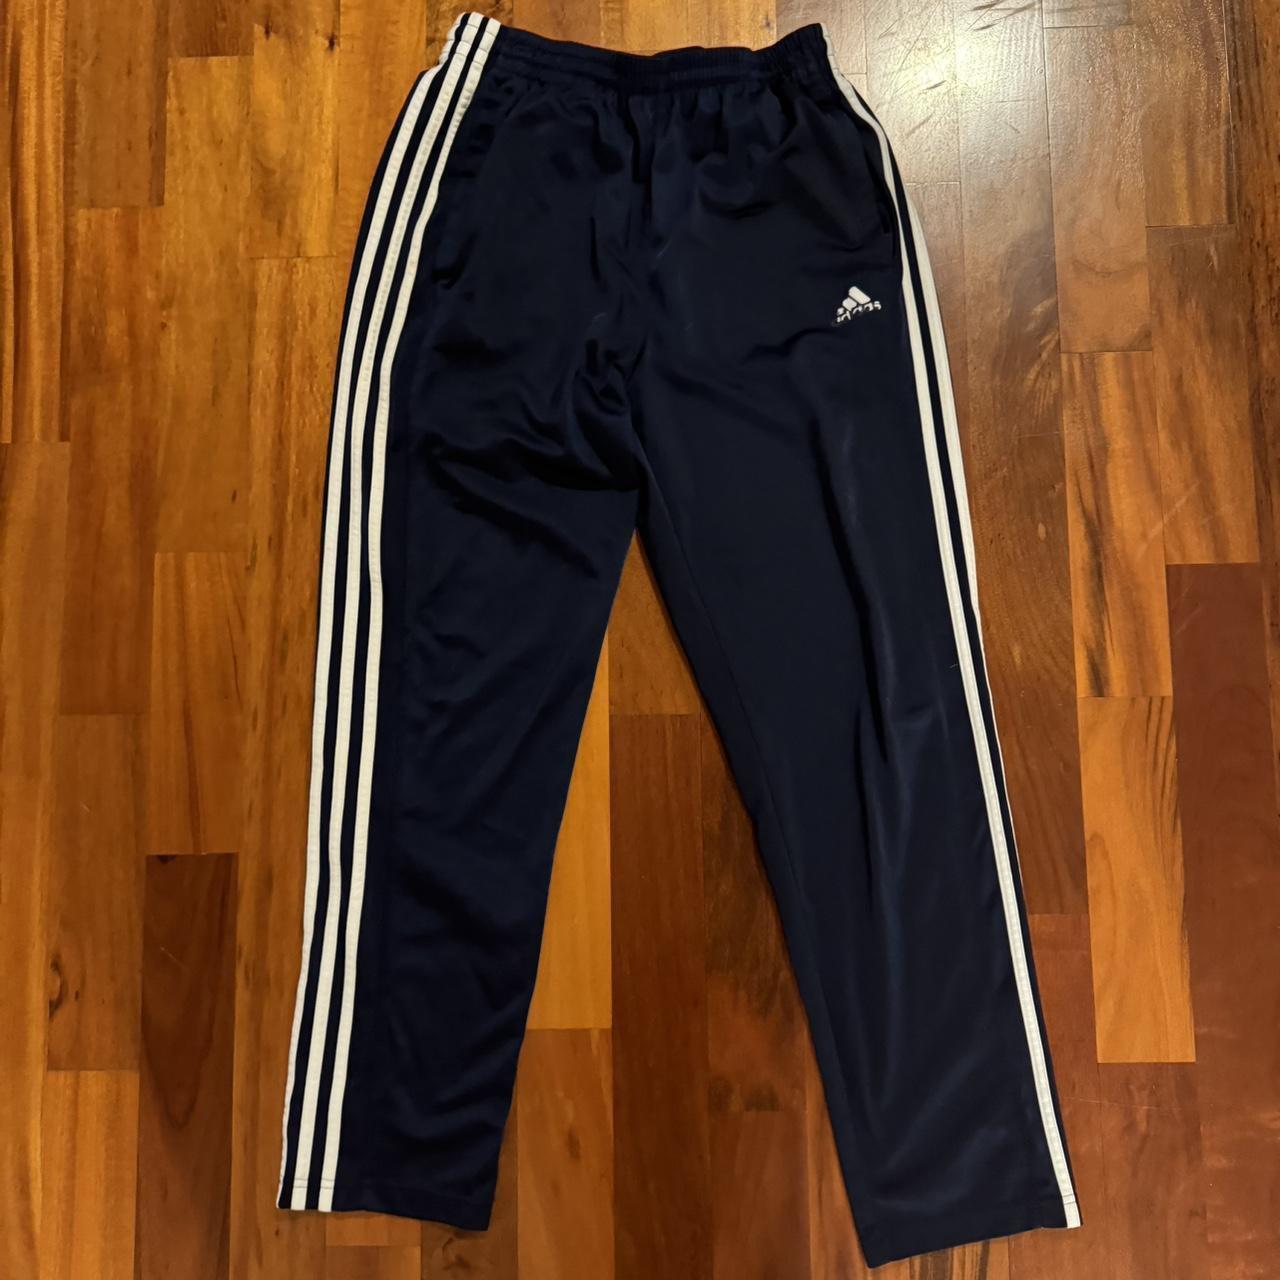 adidas Originals three stripe track pants in black | ASOS | Adidas pants  outfit, Pants outfit men, Adidas outfit